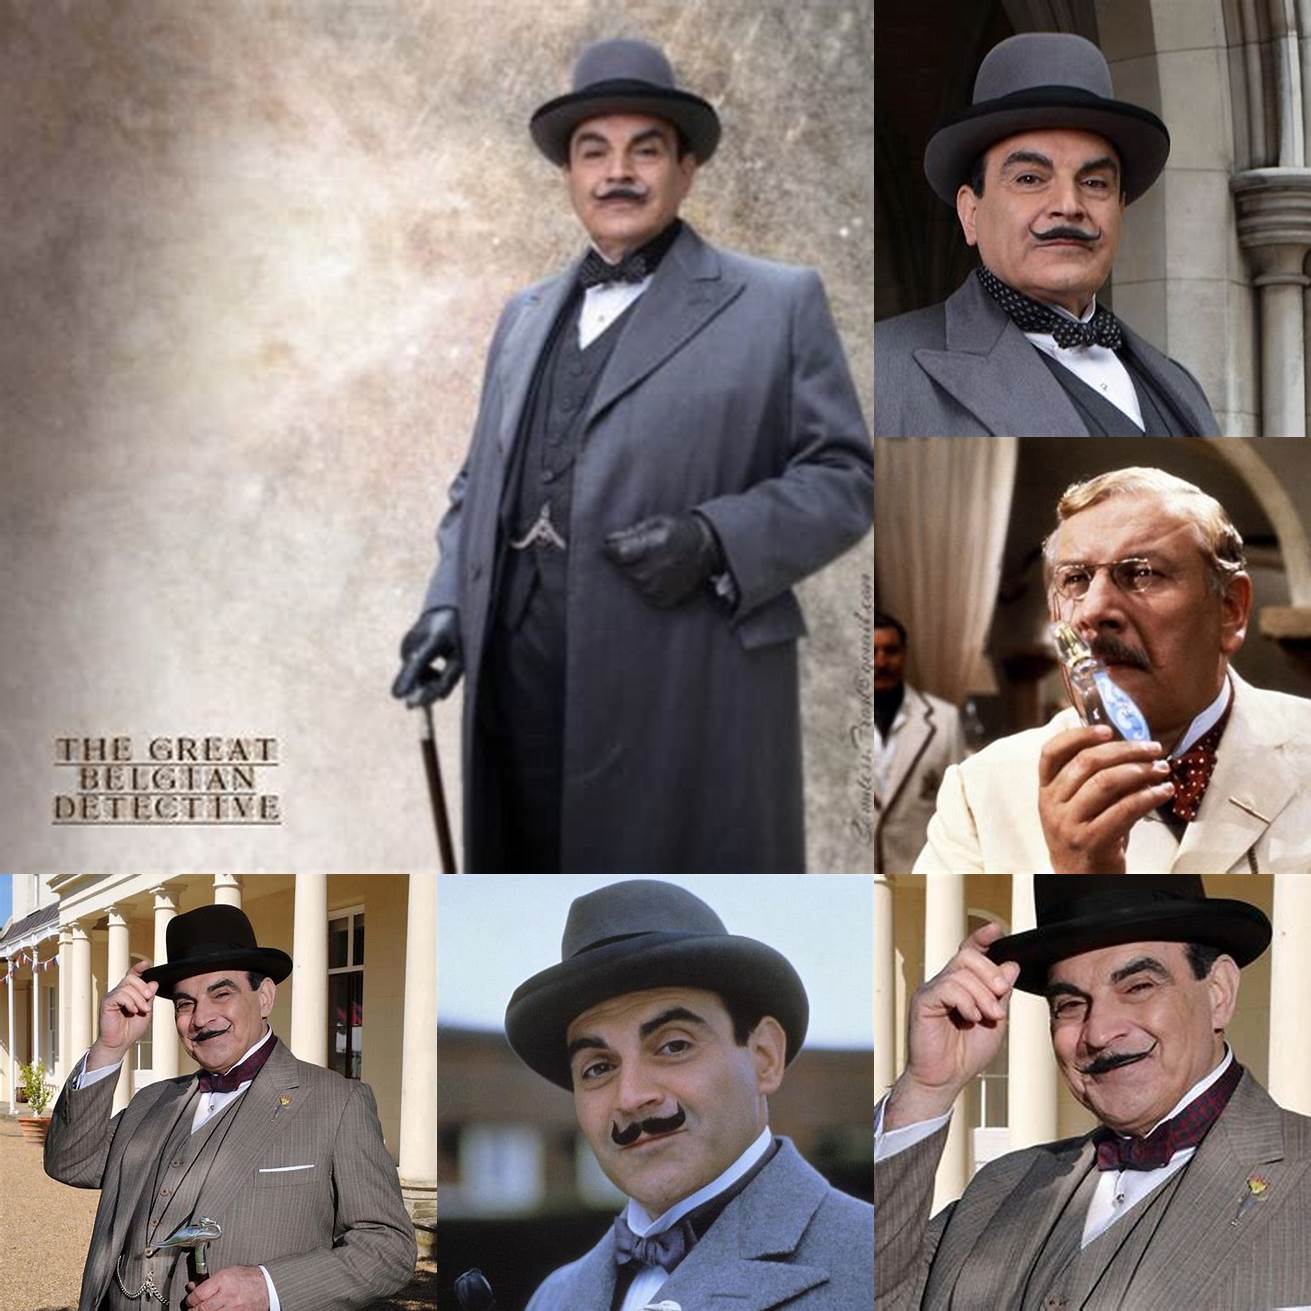 1 Hercule Poirot - The famous Belgian detective who is called to investigate the murder